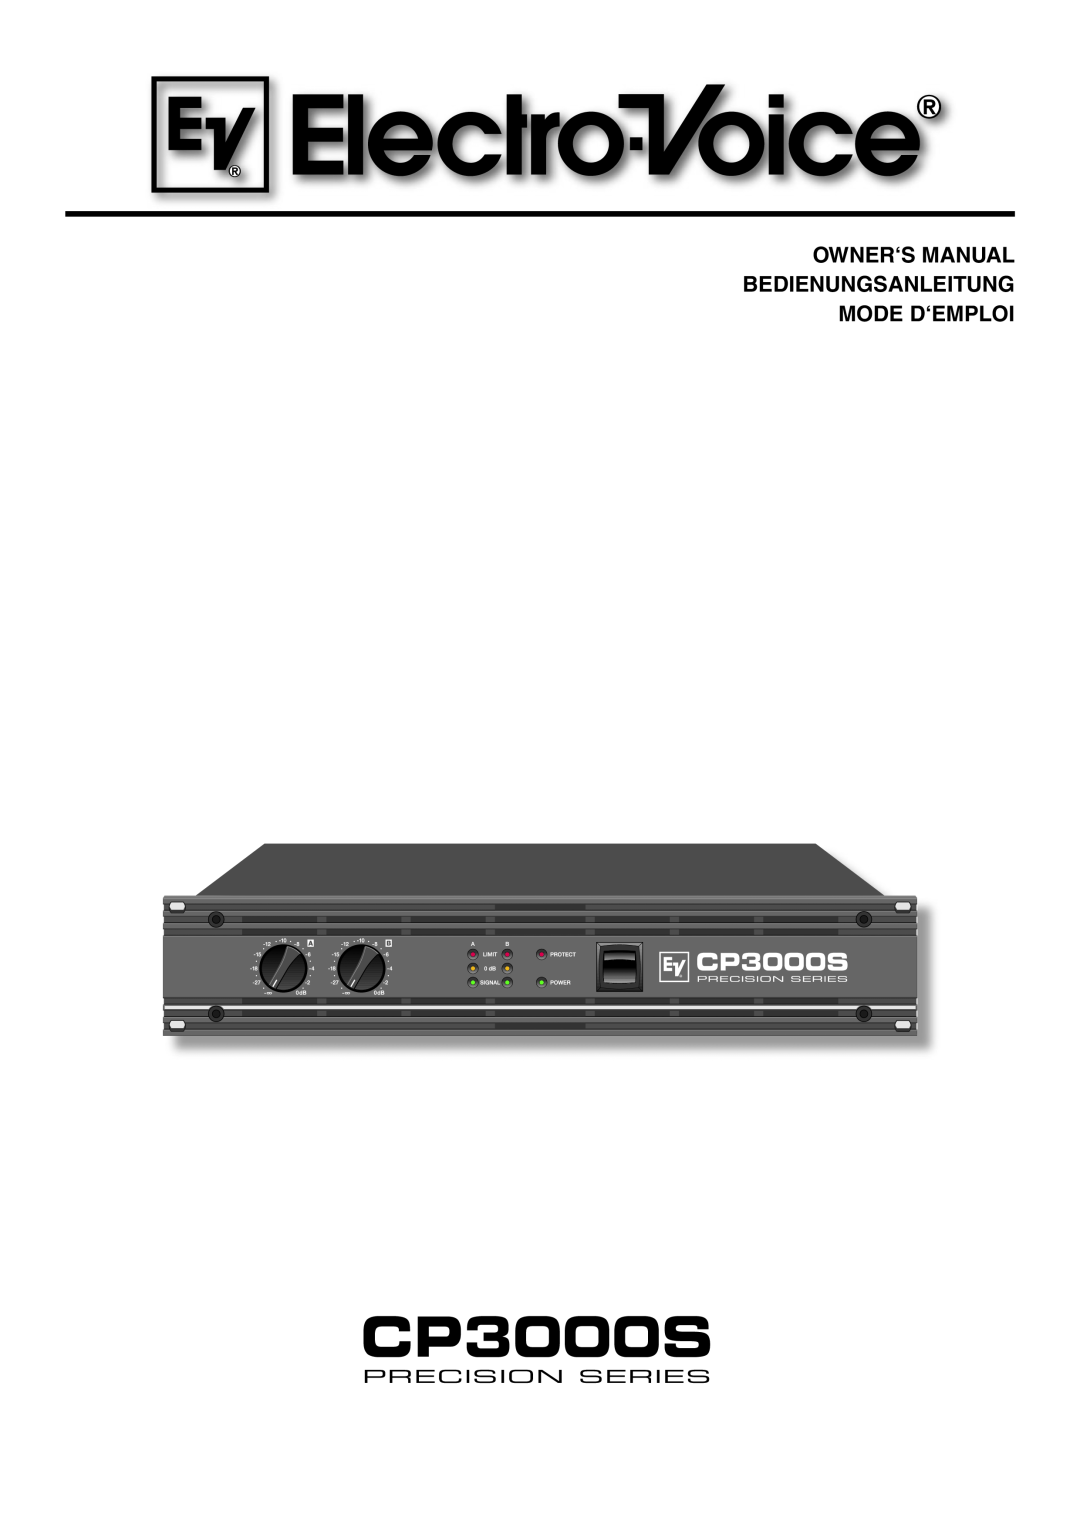 Electro-Voice CP3000S owner manual Owner‘S Manual Bedienungsanleitung Mode D‘Emploi 